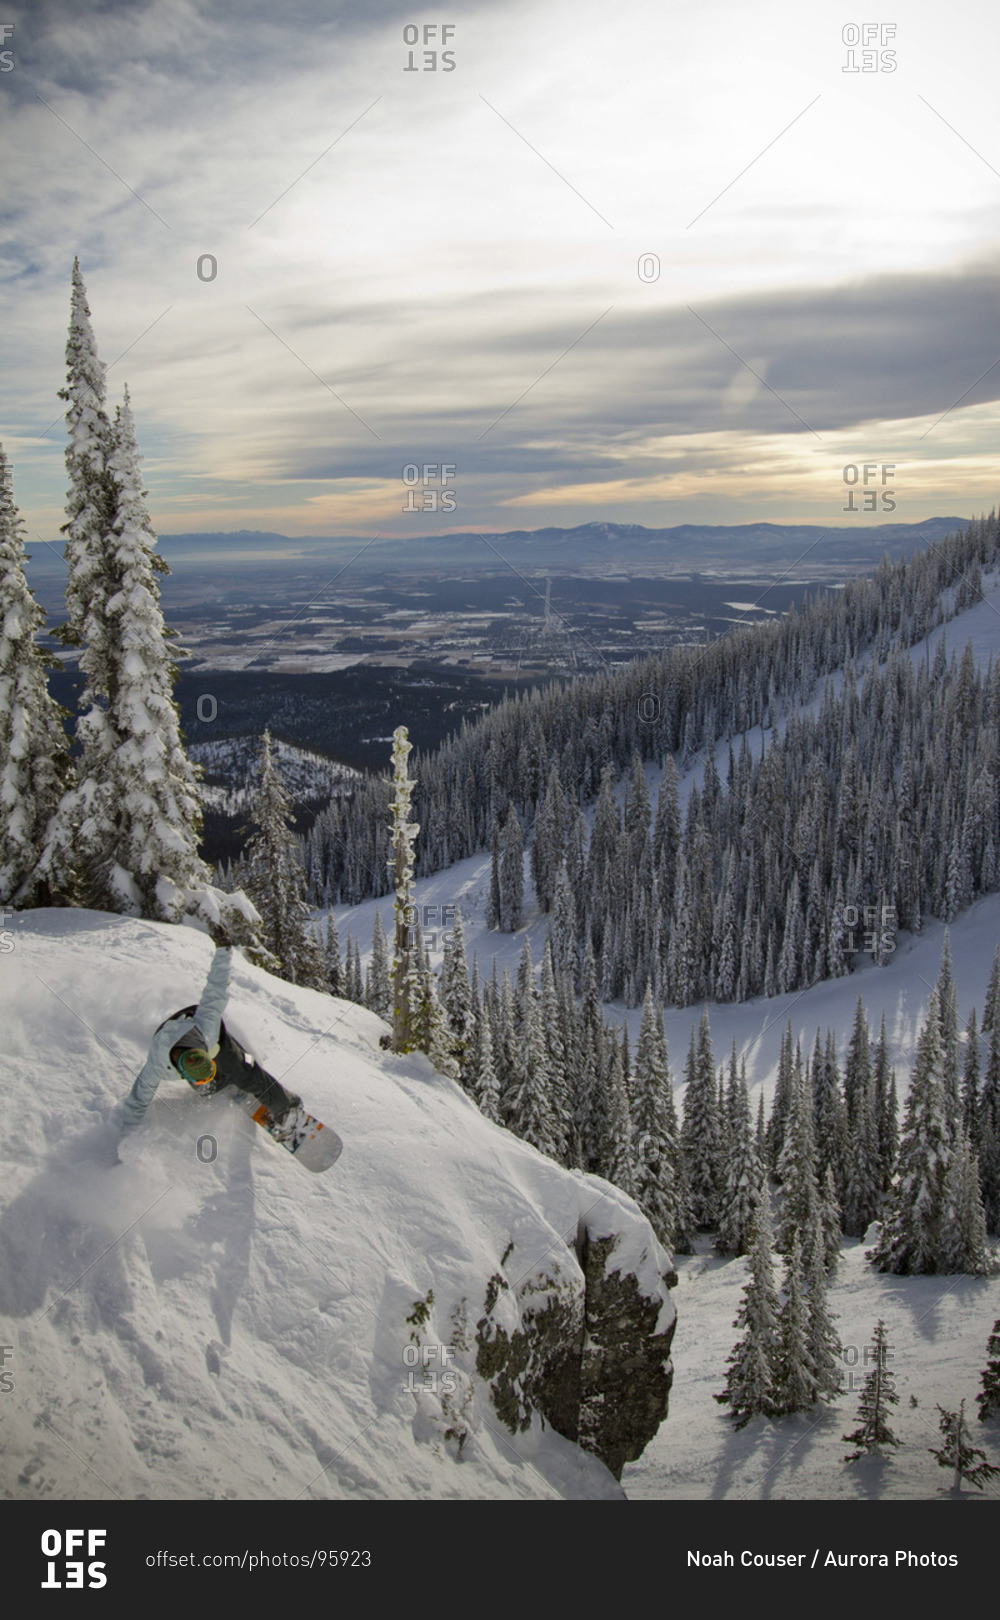 A snowboarder carves a turn atop a cliff on a cloudy winter day.